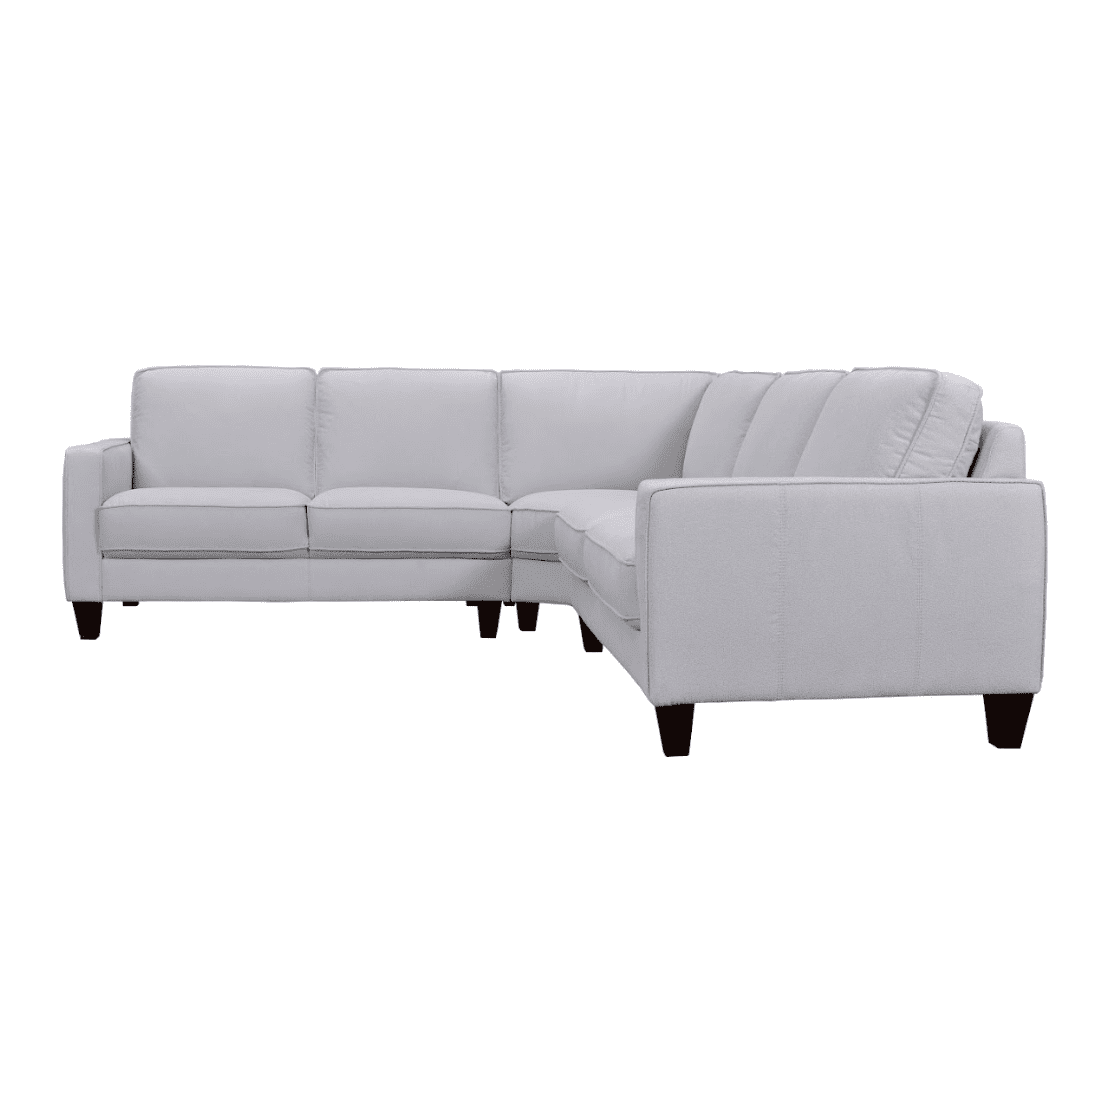 NAVY SECTIONAL